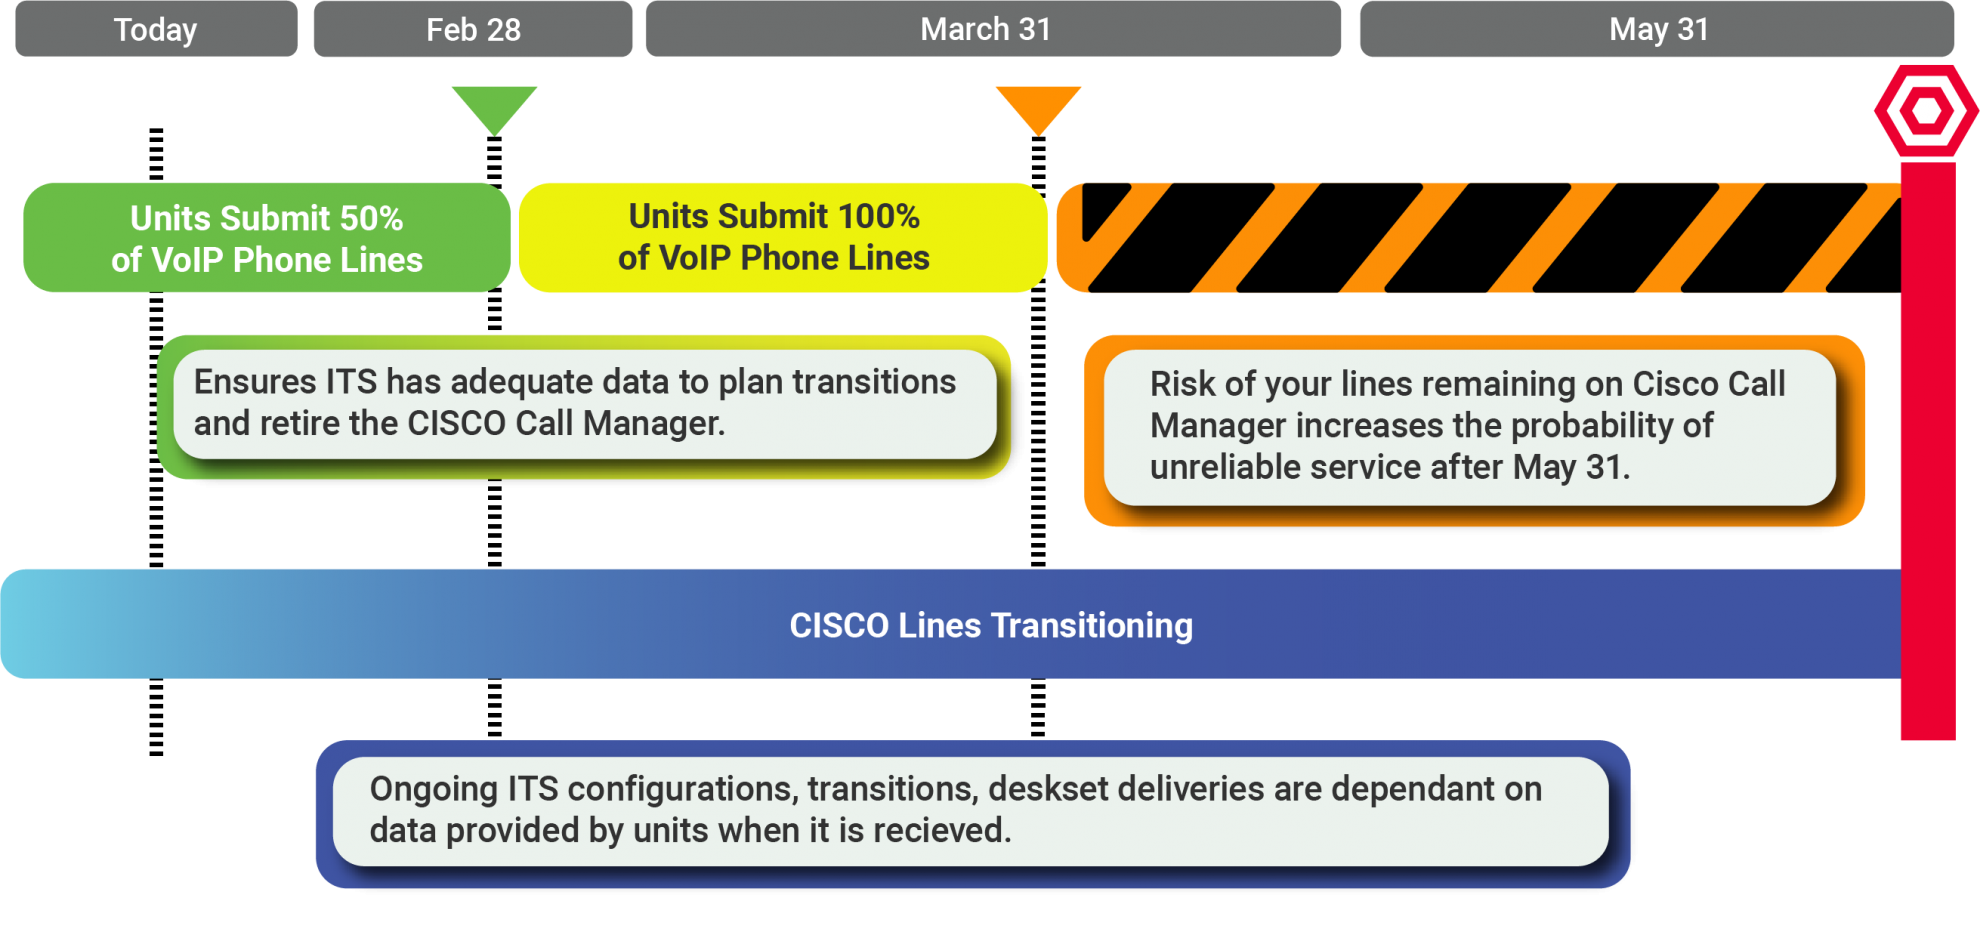 100% of unit data for VoIP phone numbers must be submitted by March 31, 2023 for ITS to meet the May 31 deadline to be off of Cisco Call Manager